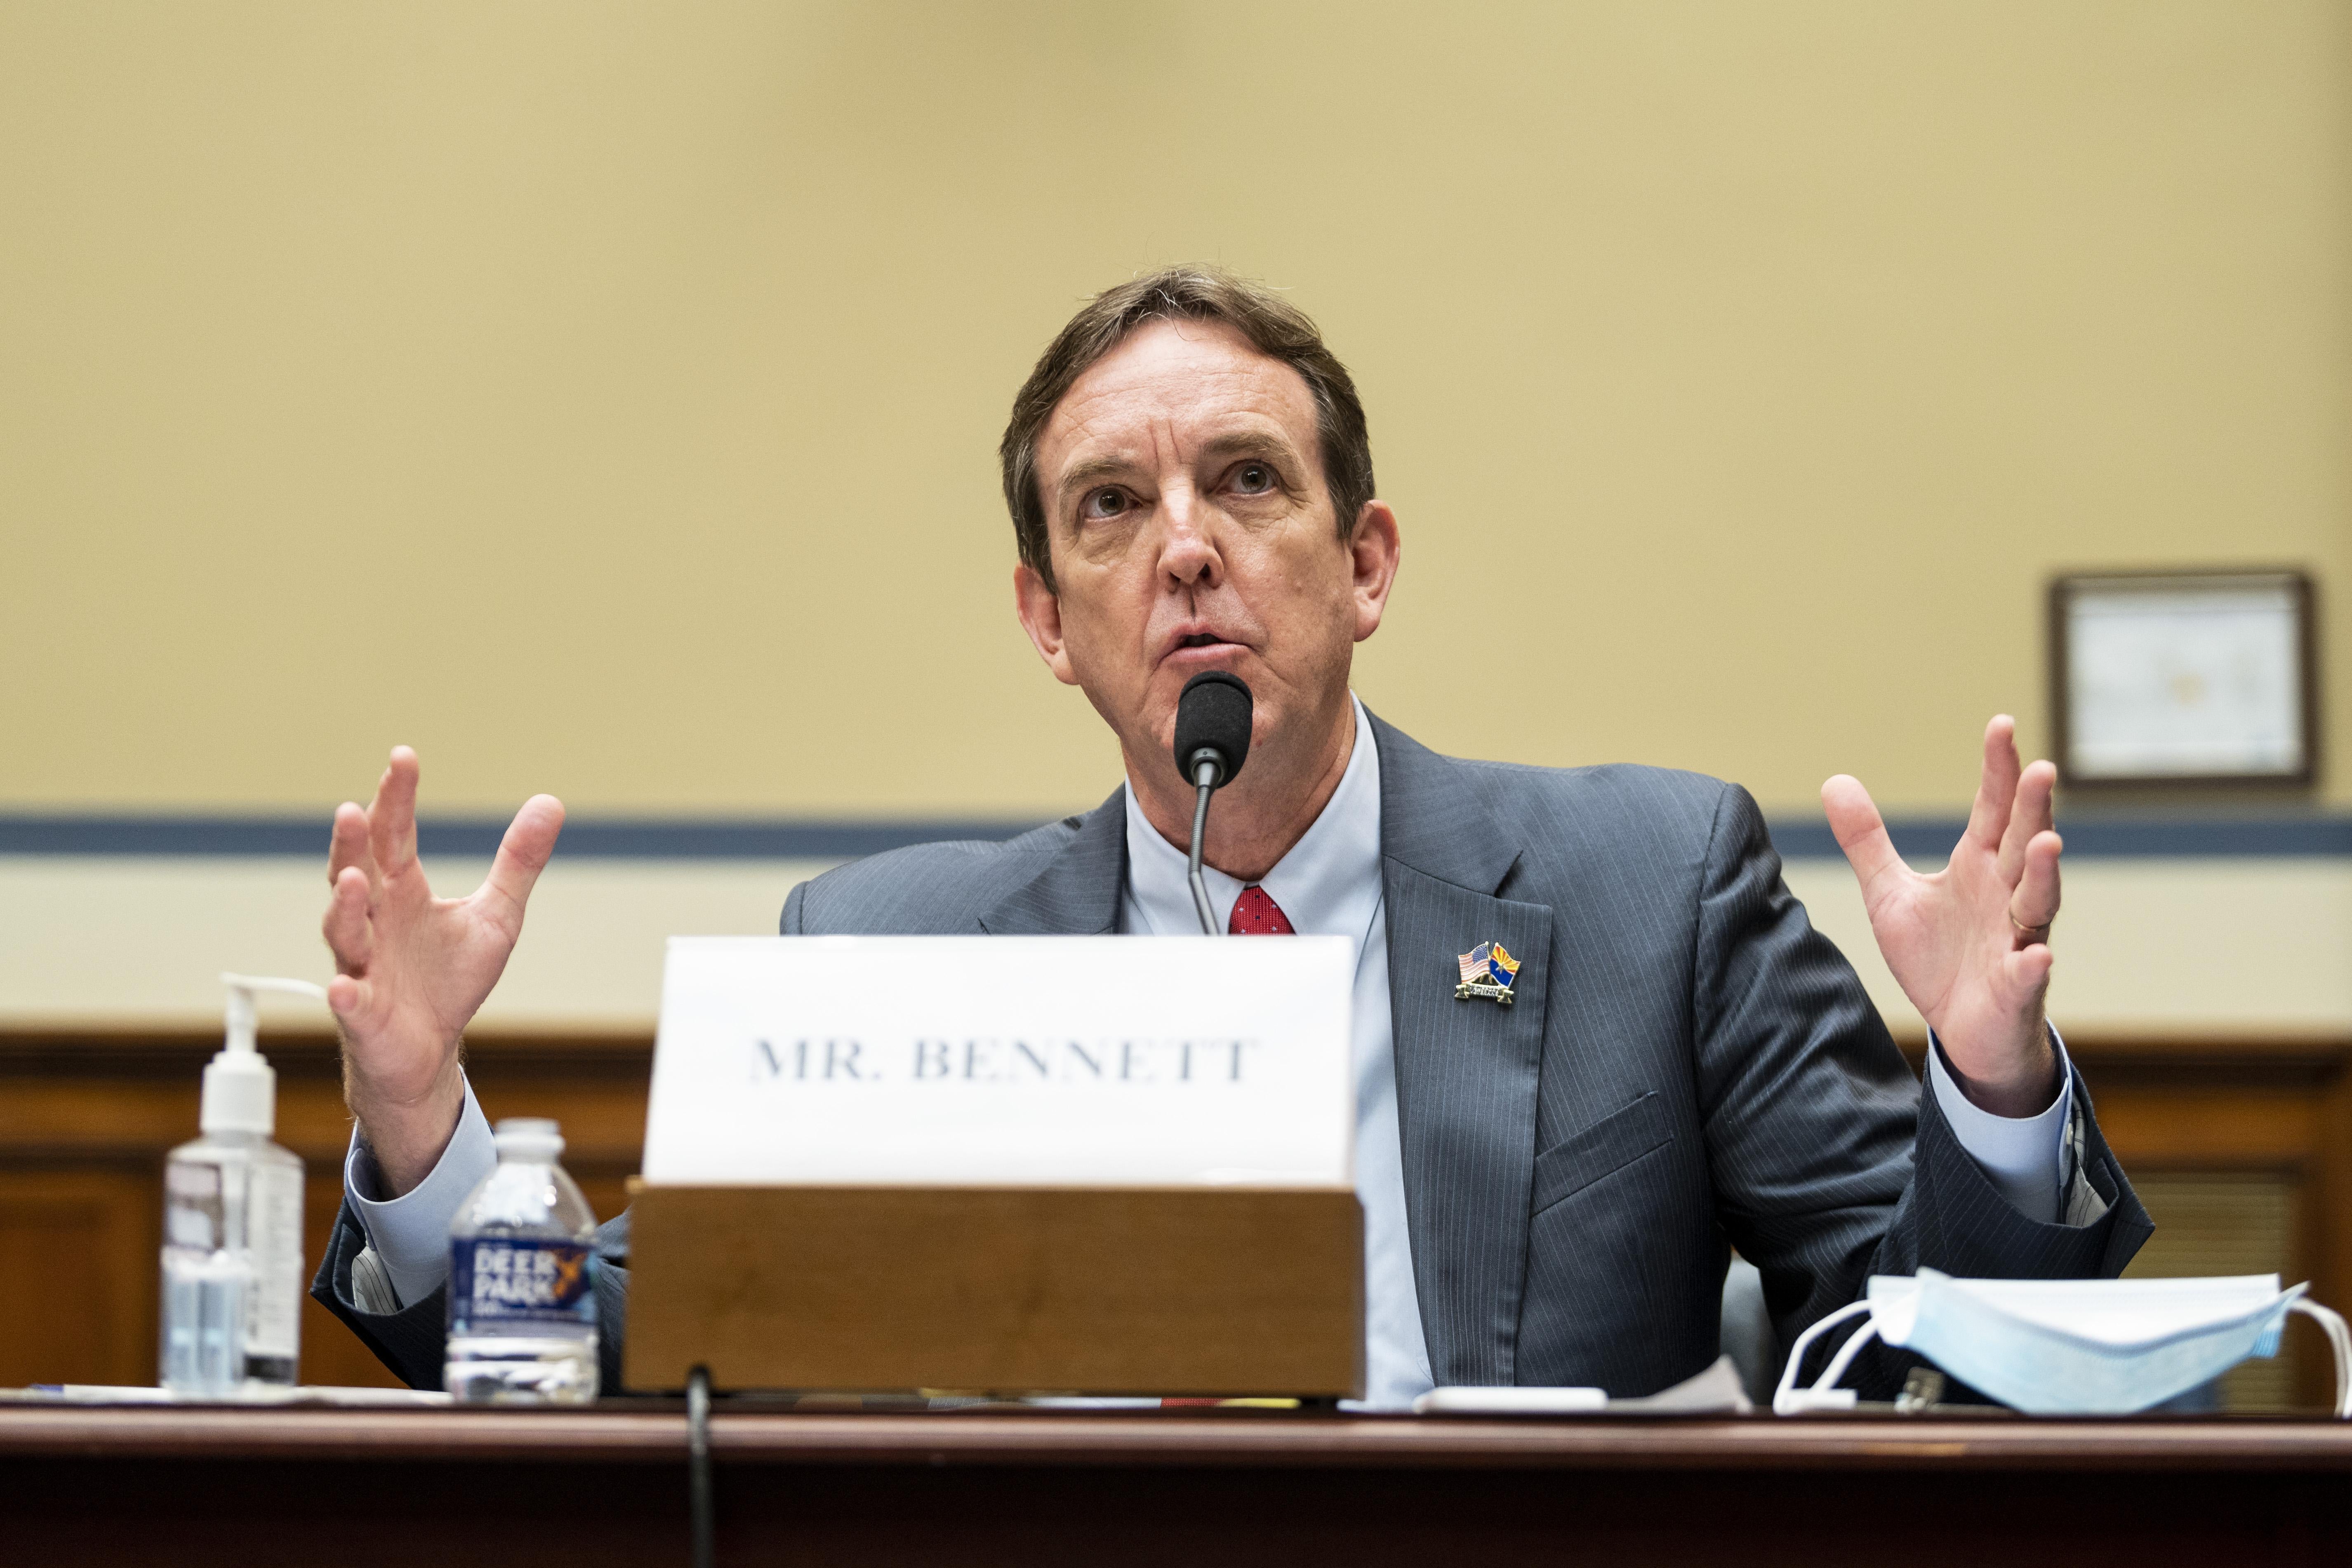 Ken Bennett gestures with both hands as he speaks at a mic while seated on a panel